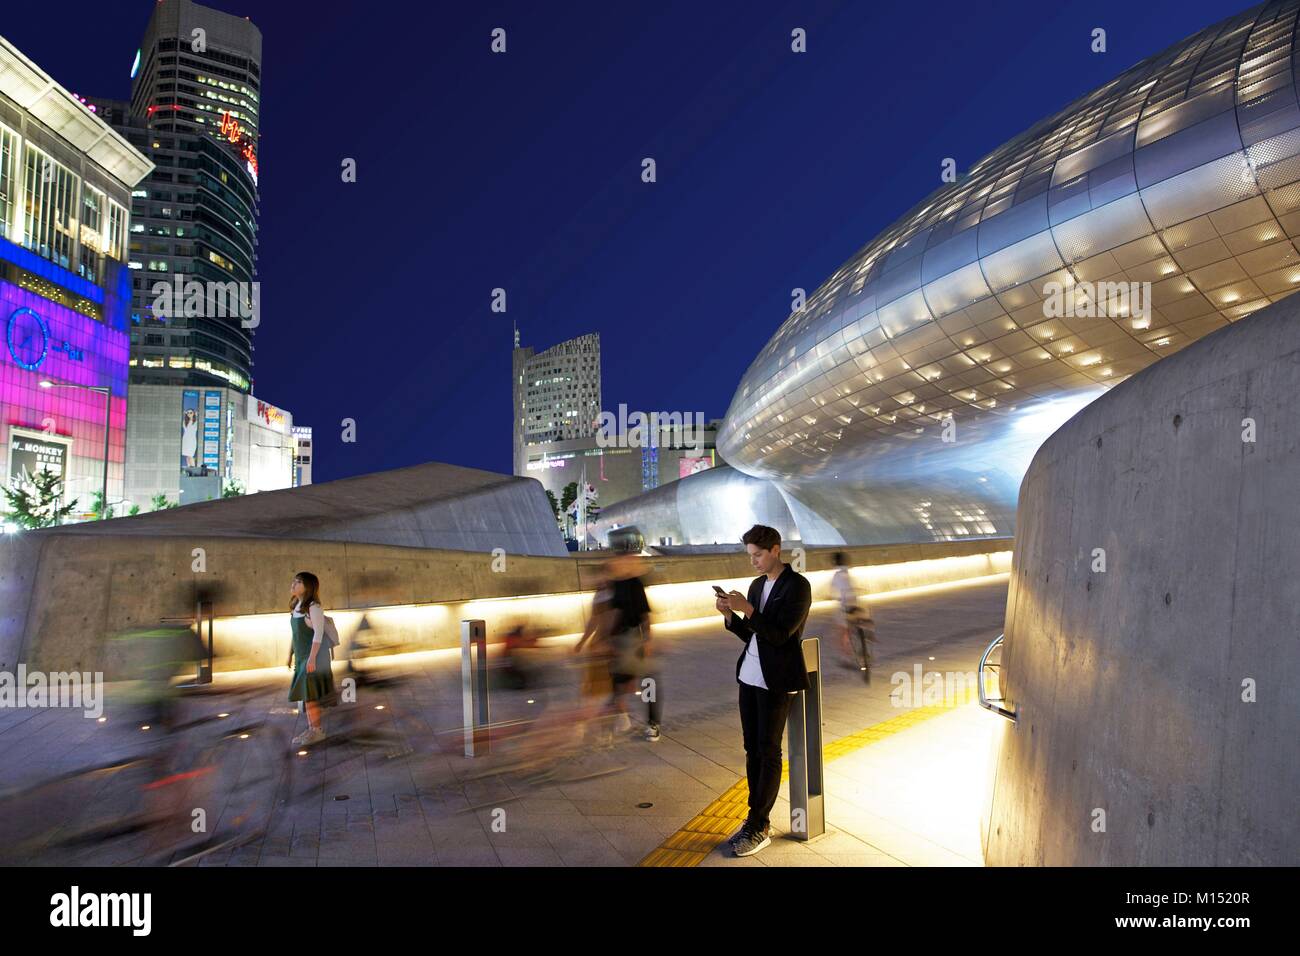 South Korea, Seoul, Fabien Yoon, french star of the korean medias, in front of the Dongdaemun Design Plaza, futuristic building of the architect Zaha Hadid Stock Photo